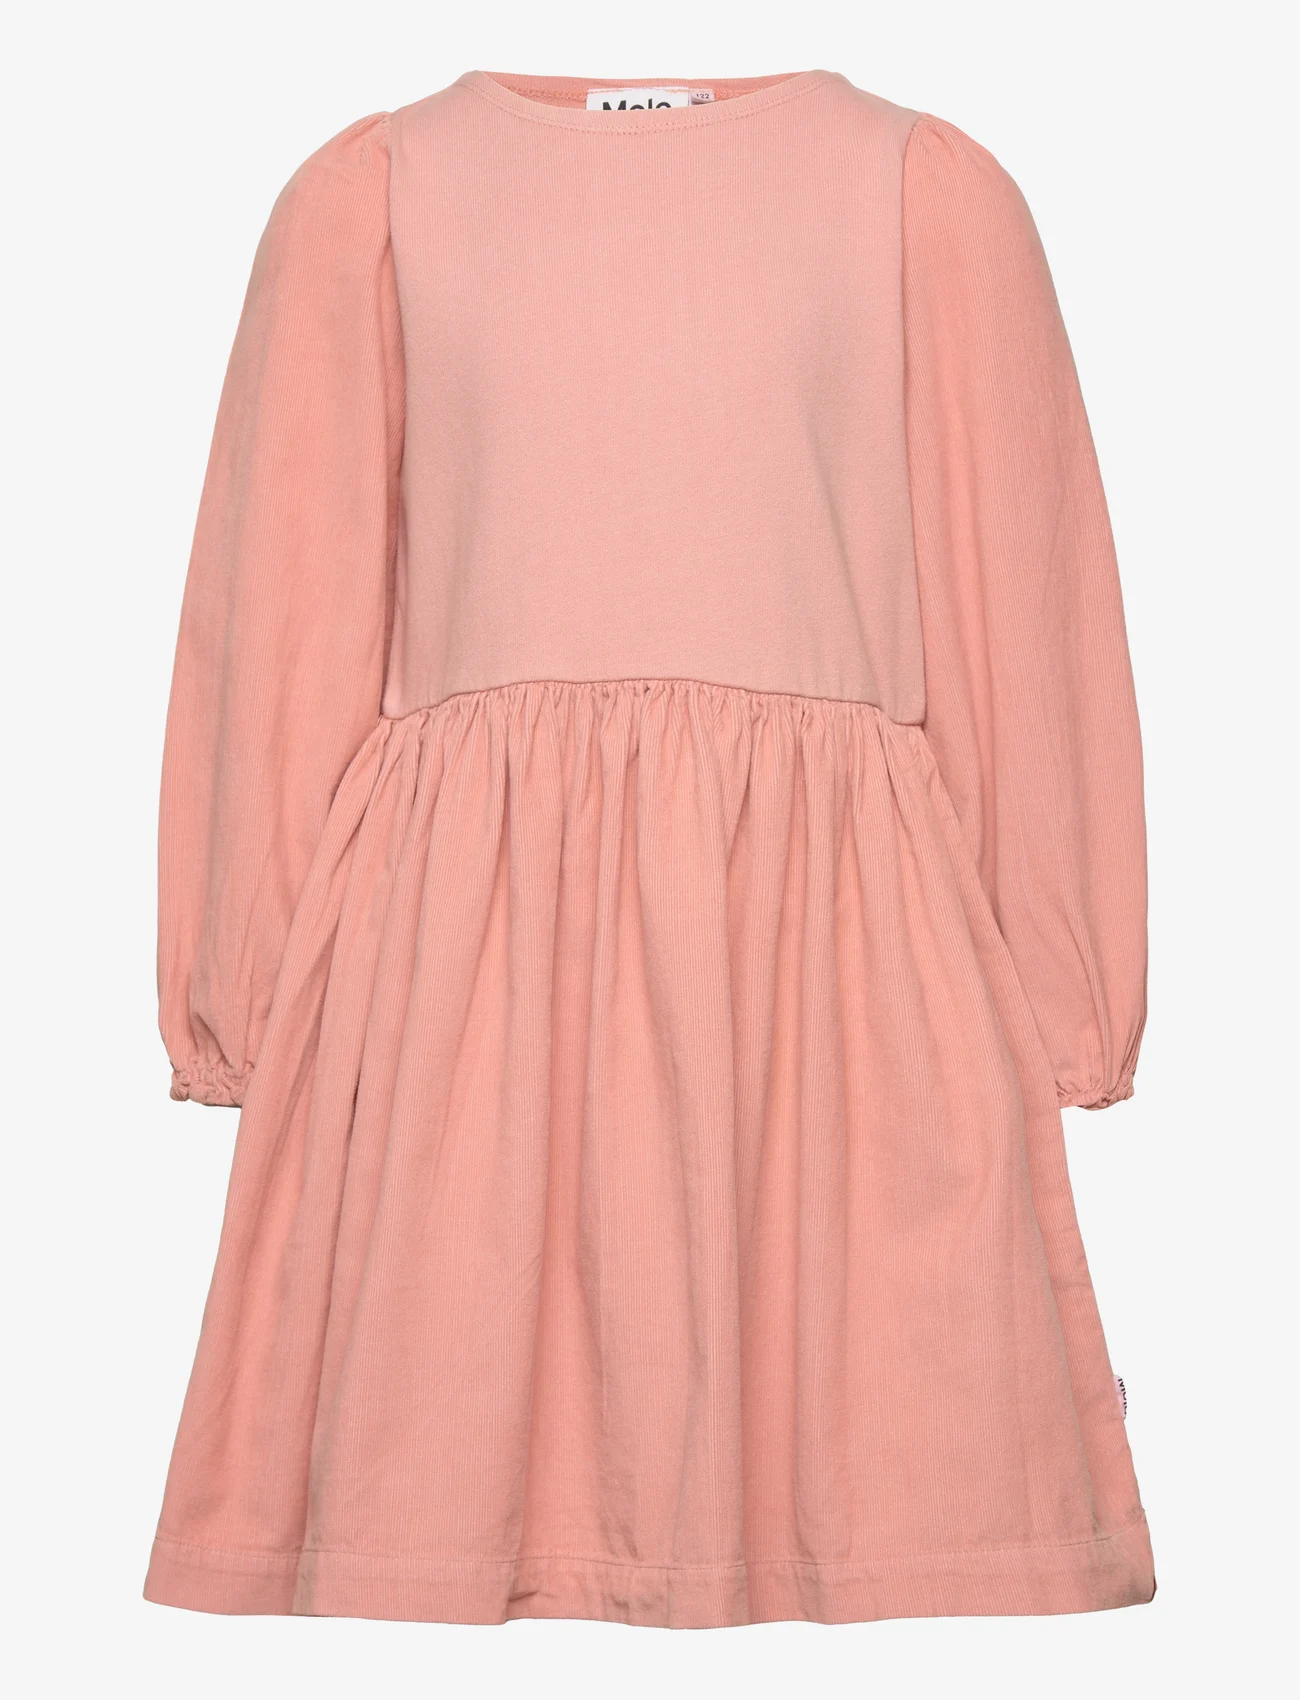 Molo - Caro - long-sleeved casual dresses - muted rose - 0